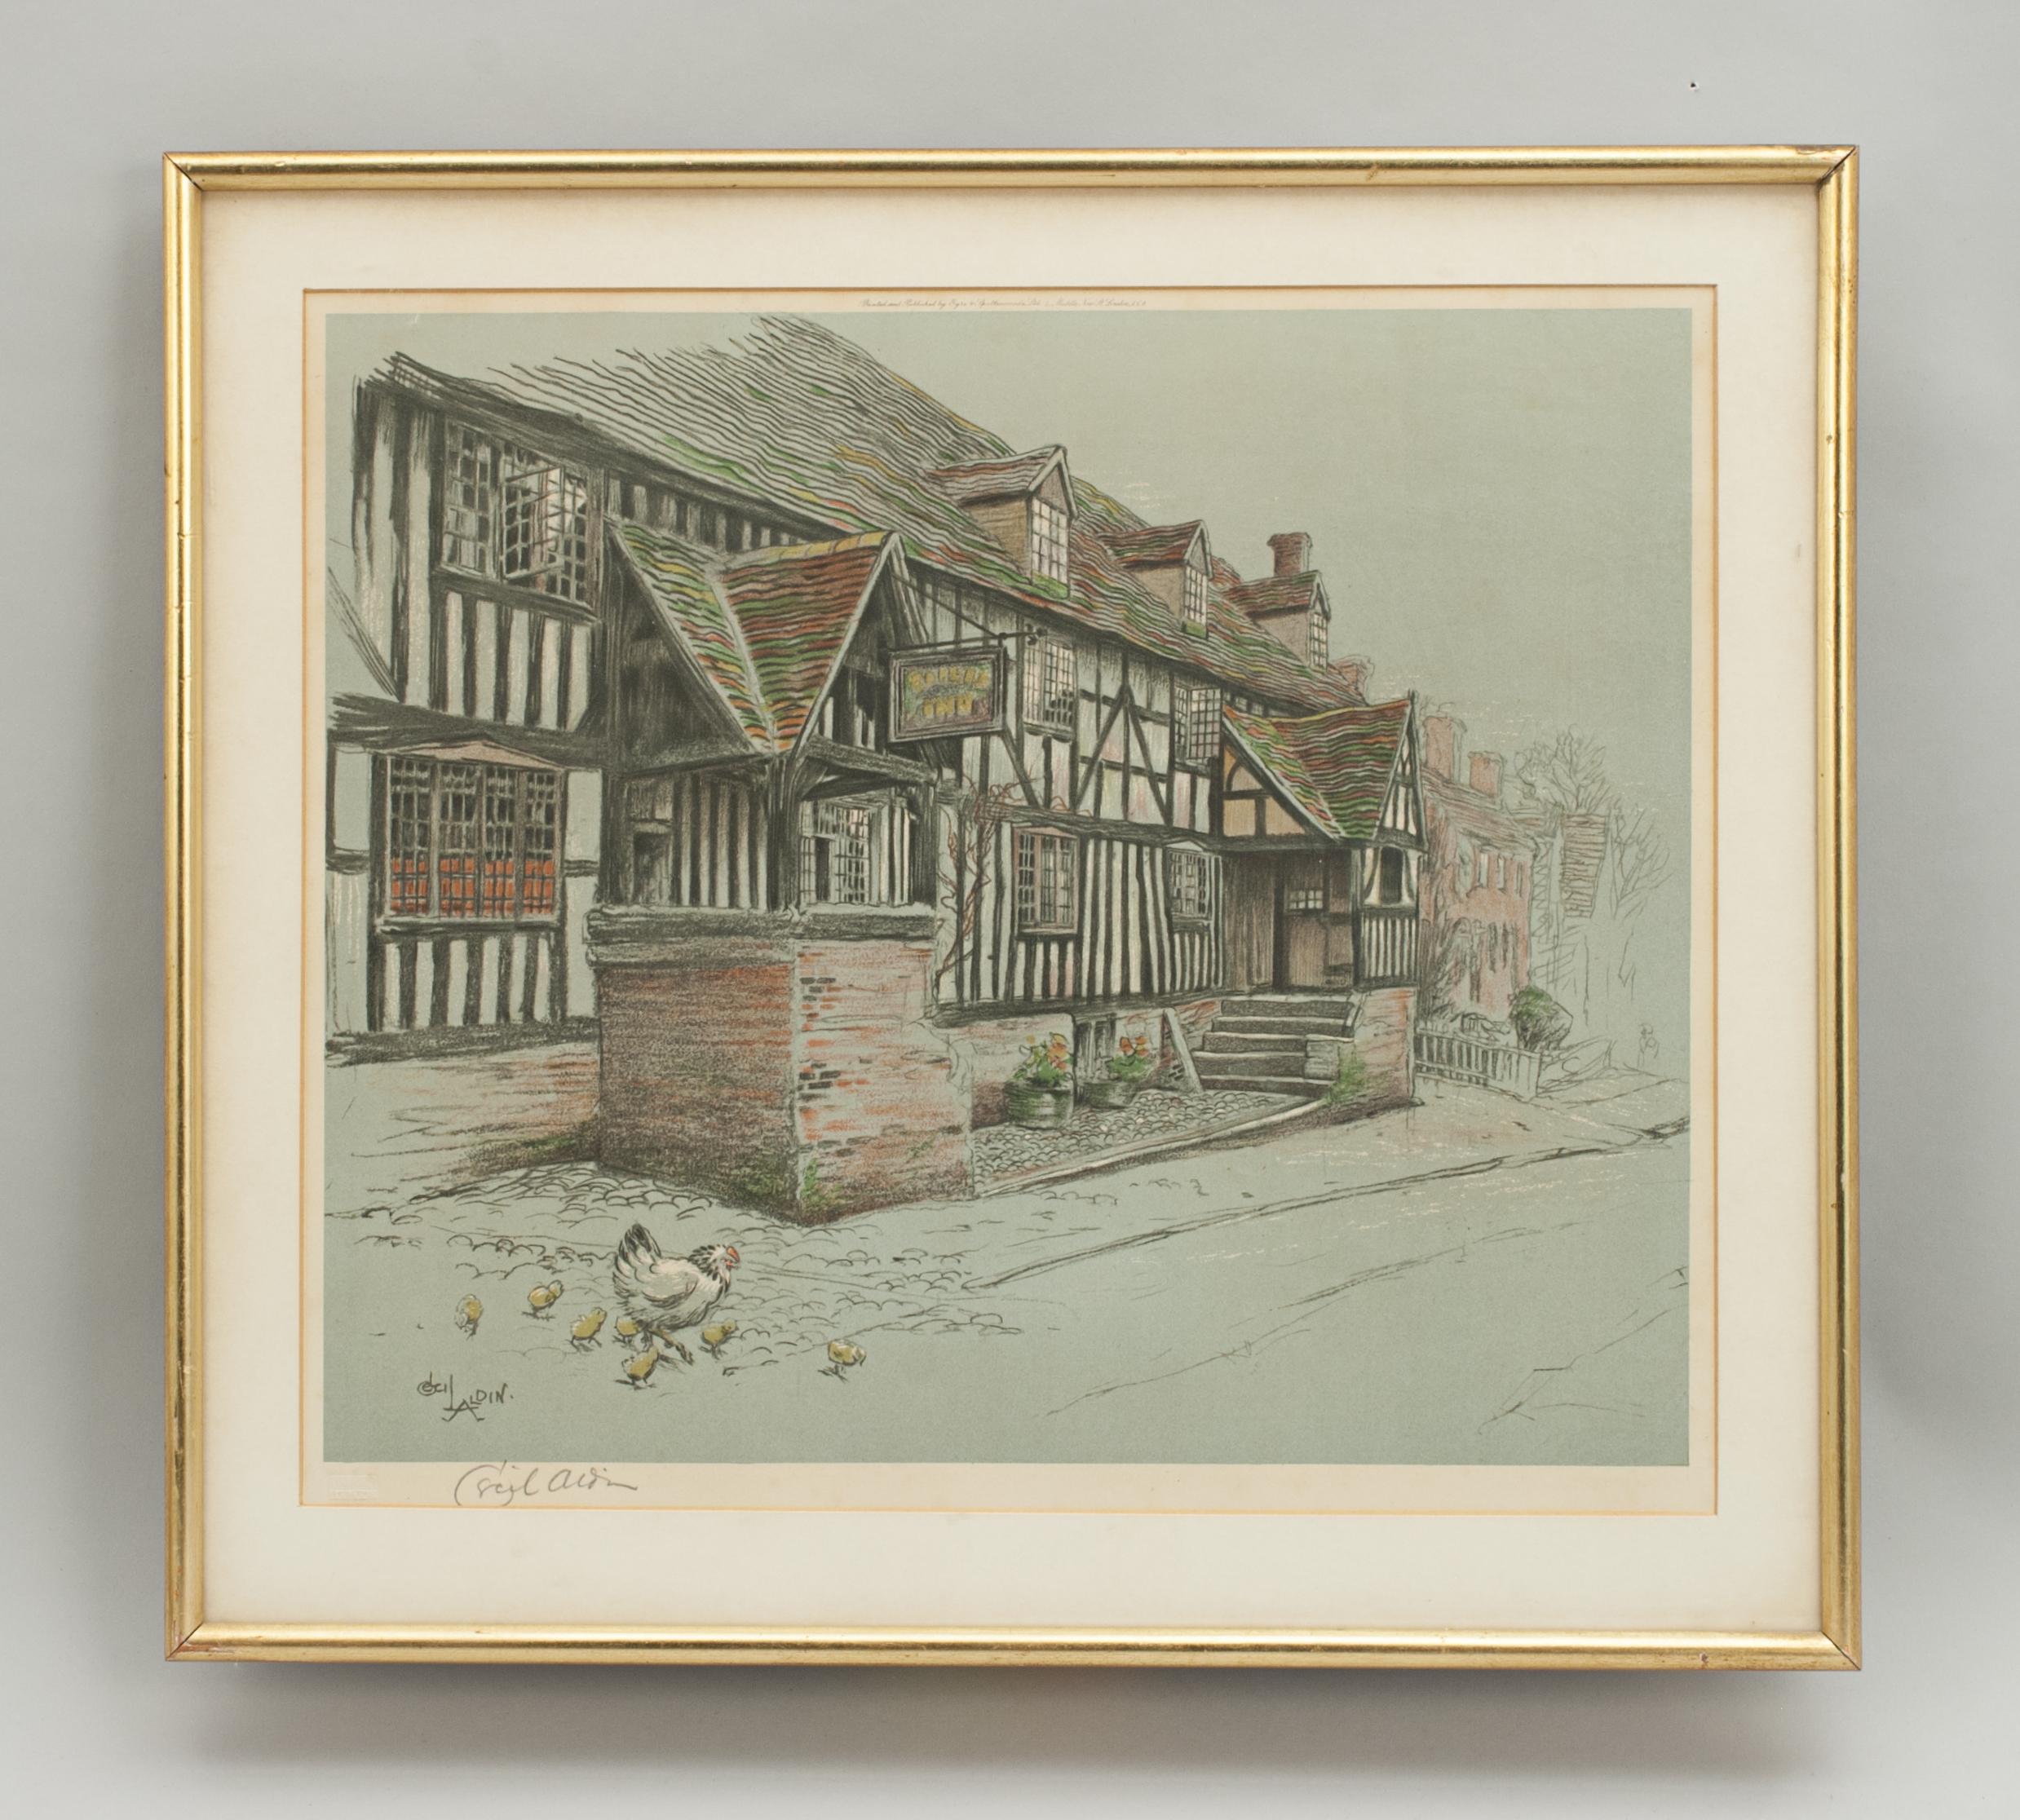 Cecil Aldin, Old Inns, The Talbot Inn.
A very nice colourful Chromolithograph by Cecil Aldin of The Talbot Inn, Chaddesley, Corbett. The print is printed and published by Eyre & Spottiswoode, Ltd., 4 Middle New Street, London, E.C.4. and signed in